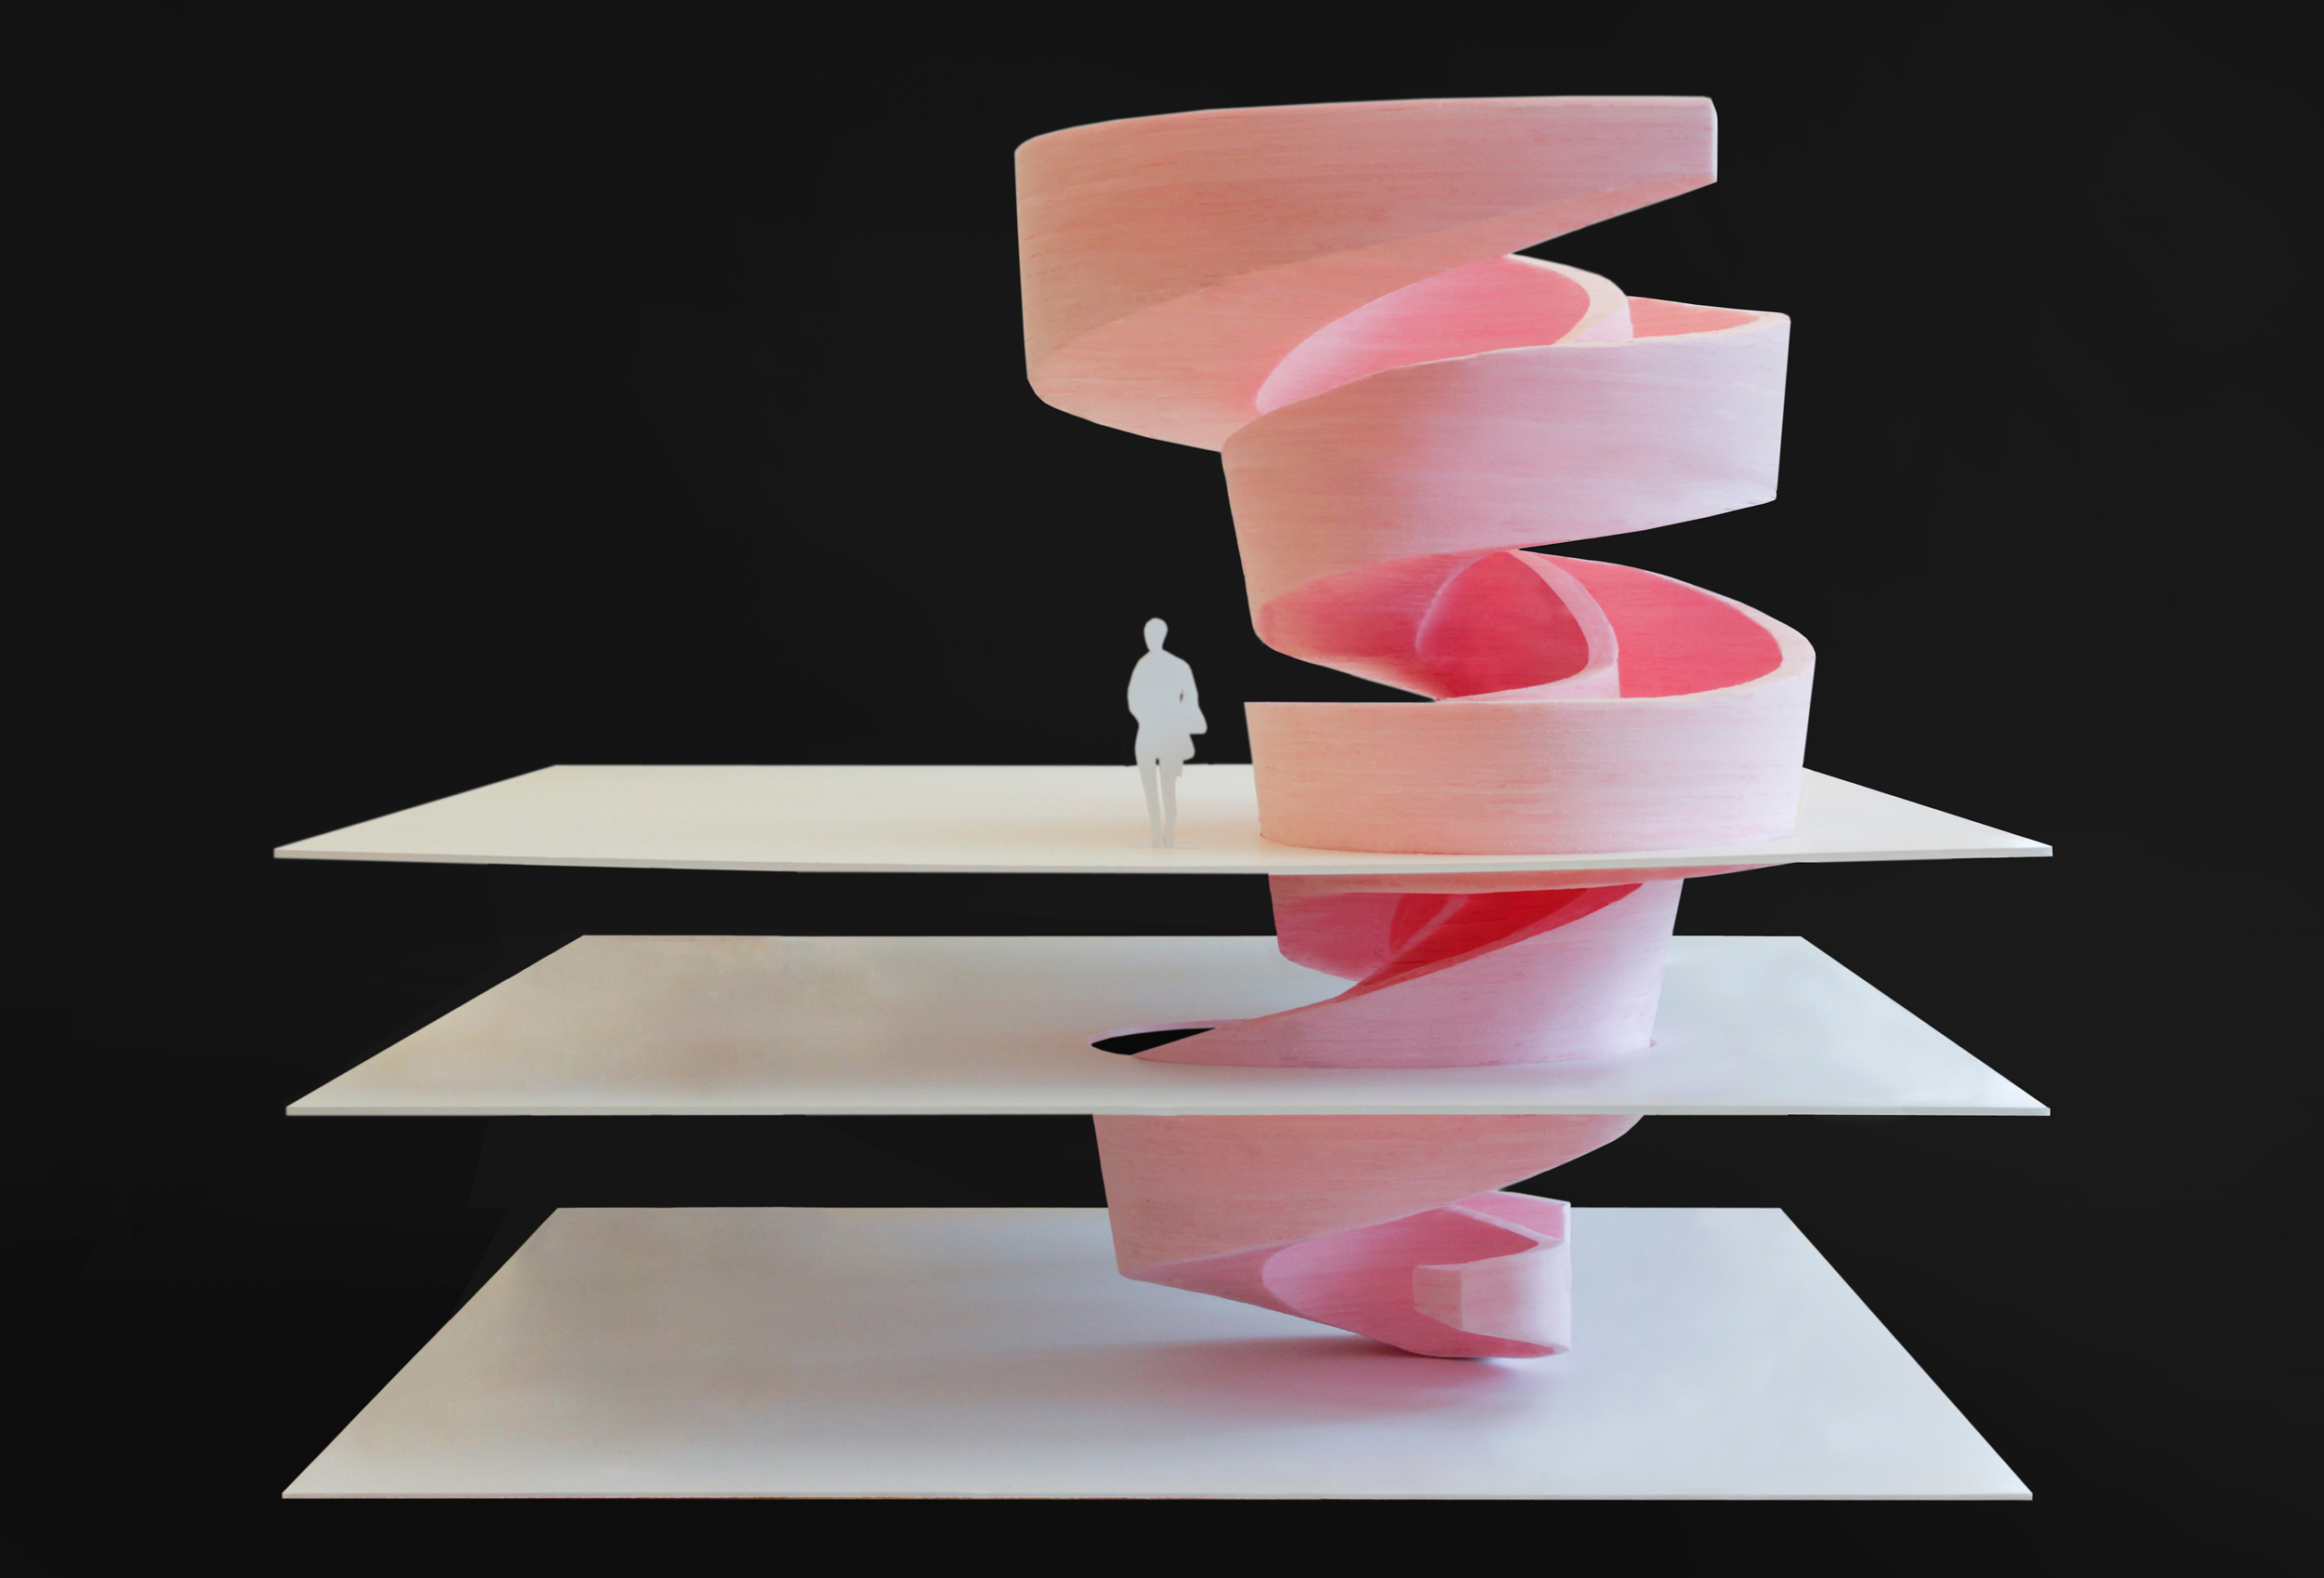 A photograph of the Necklace Residence sculptural stair model.